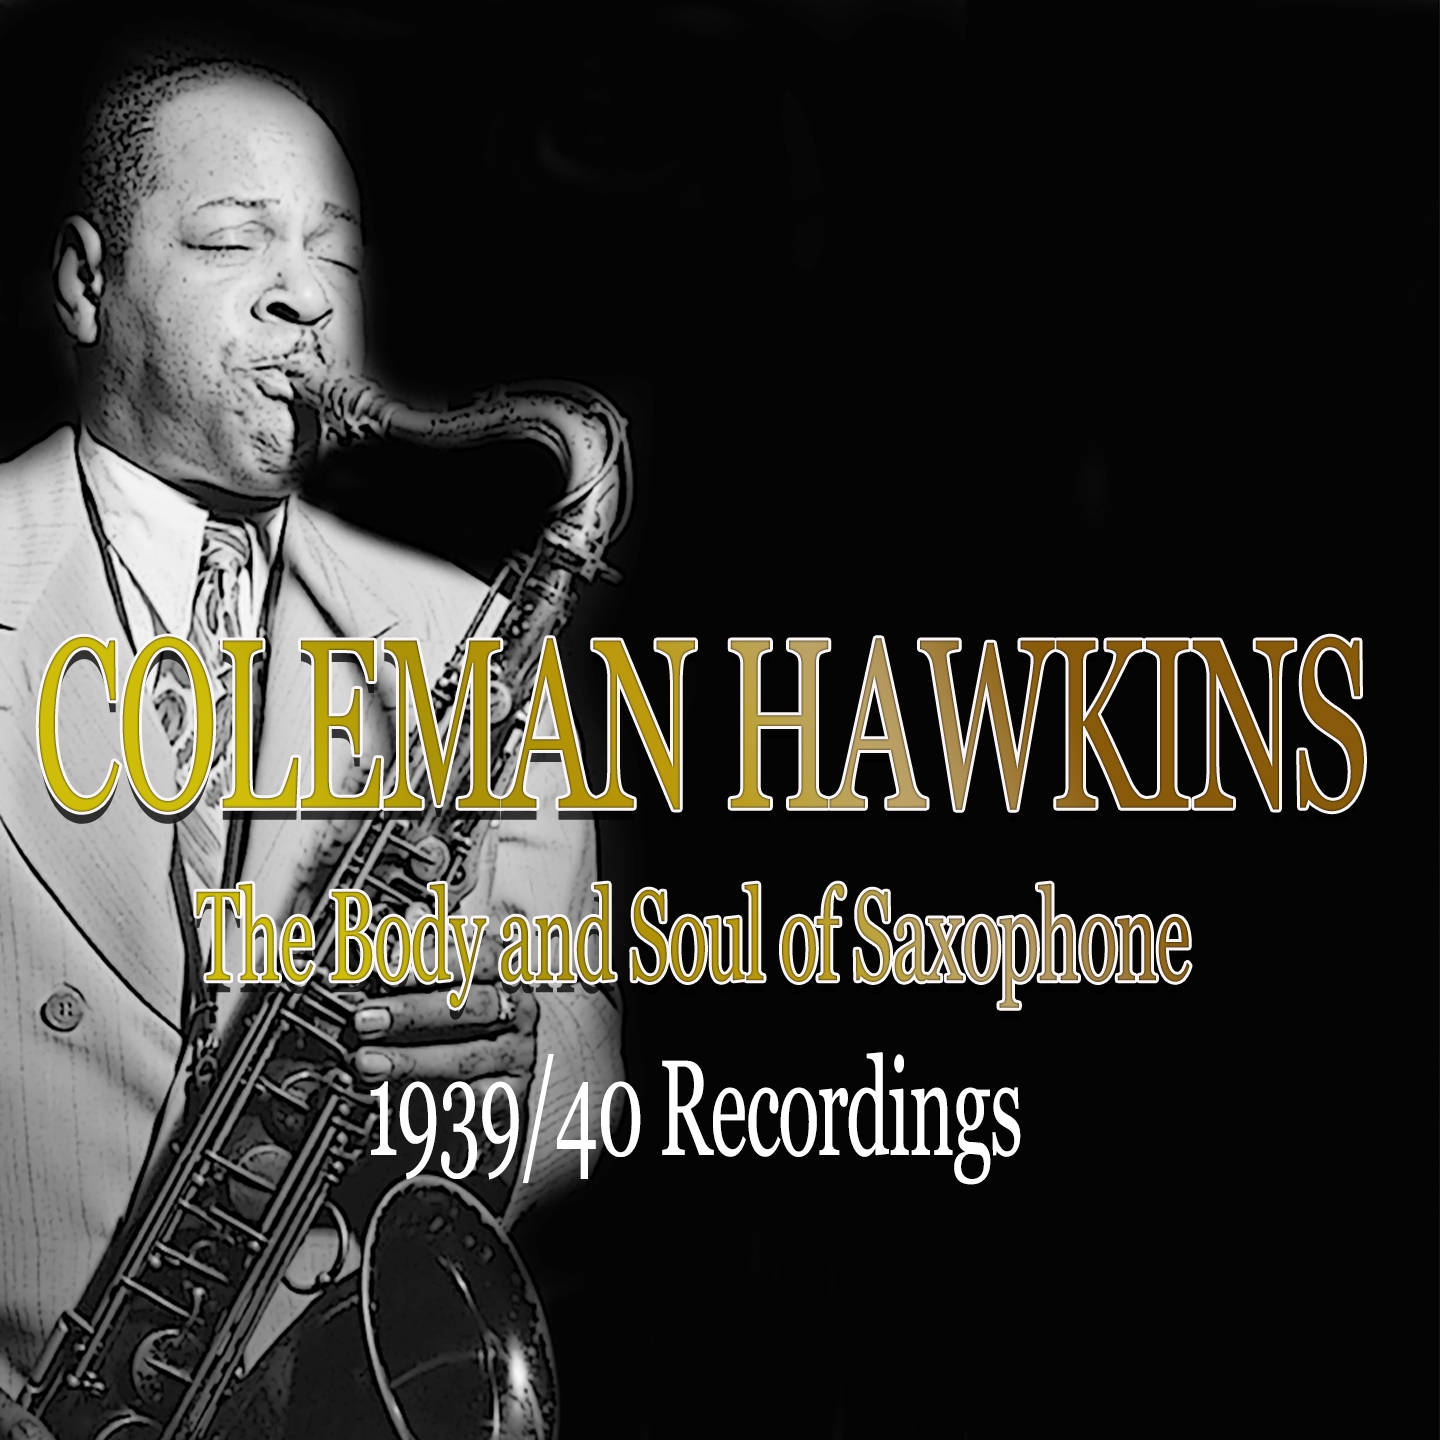 Colemanhawkins 1939 Album Med Inspelningar - This Could Be A Potential Title For A Computer Or Mobile Wallpaper Featuring Artwork Related To The Jazz Saxophonist Coleman Hawkins' Recording Album From 1939. Wallpaper